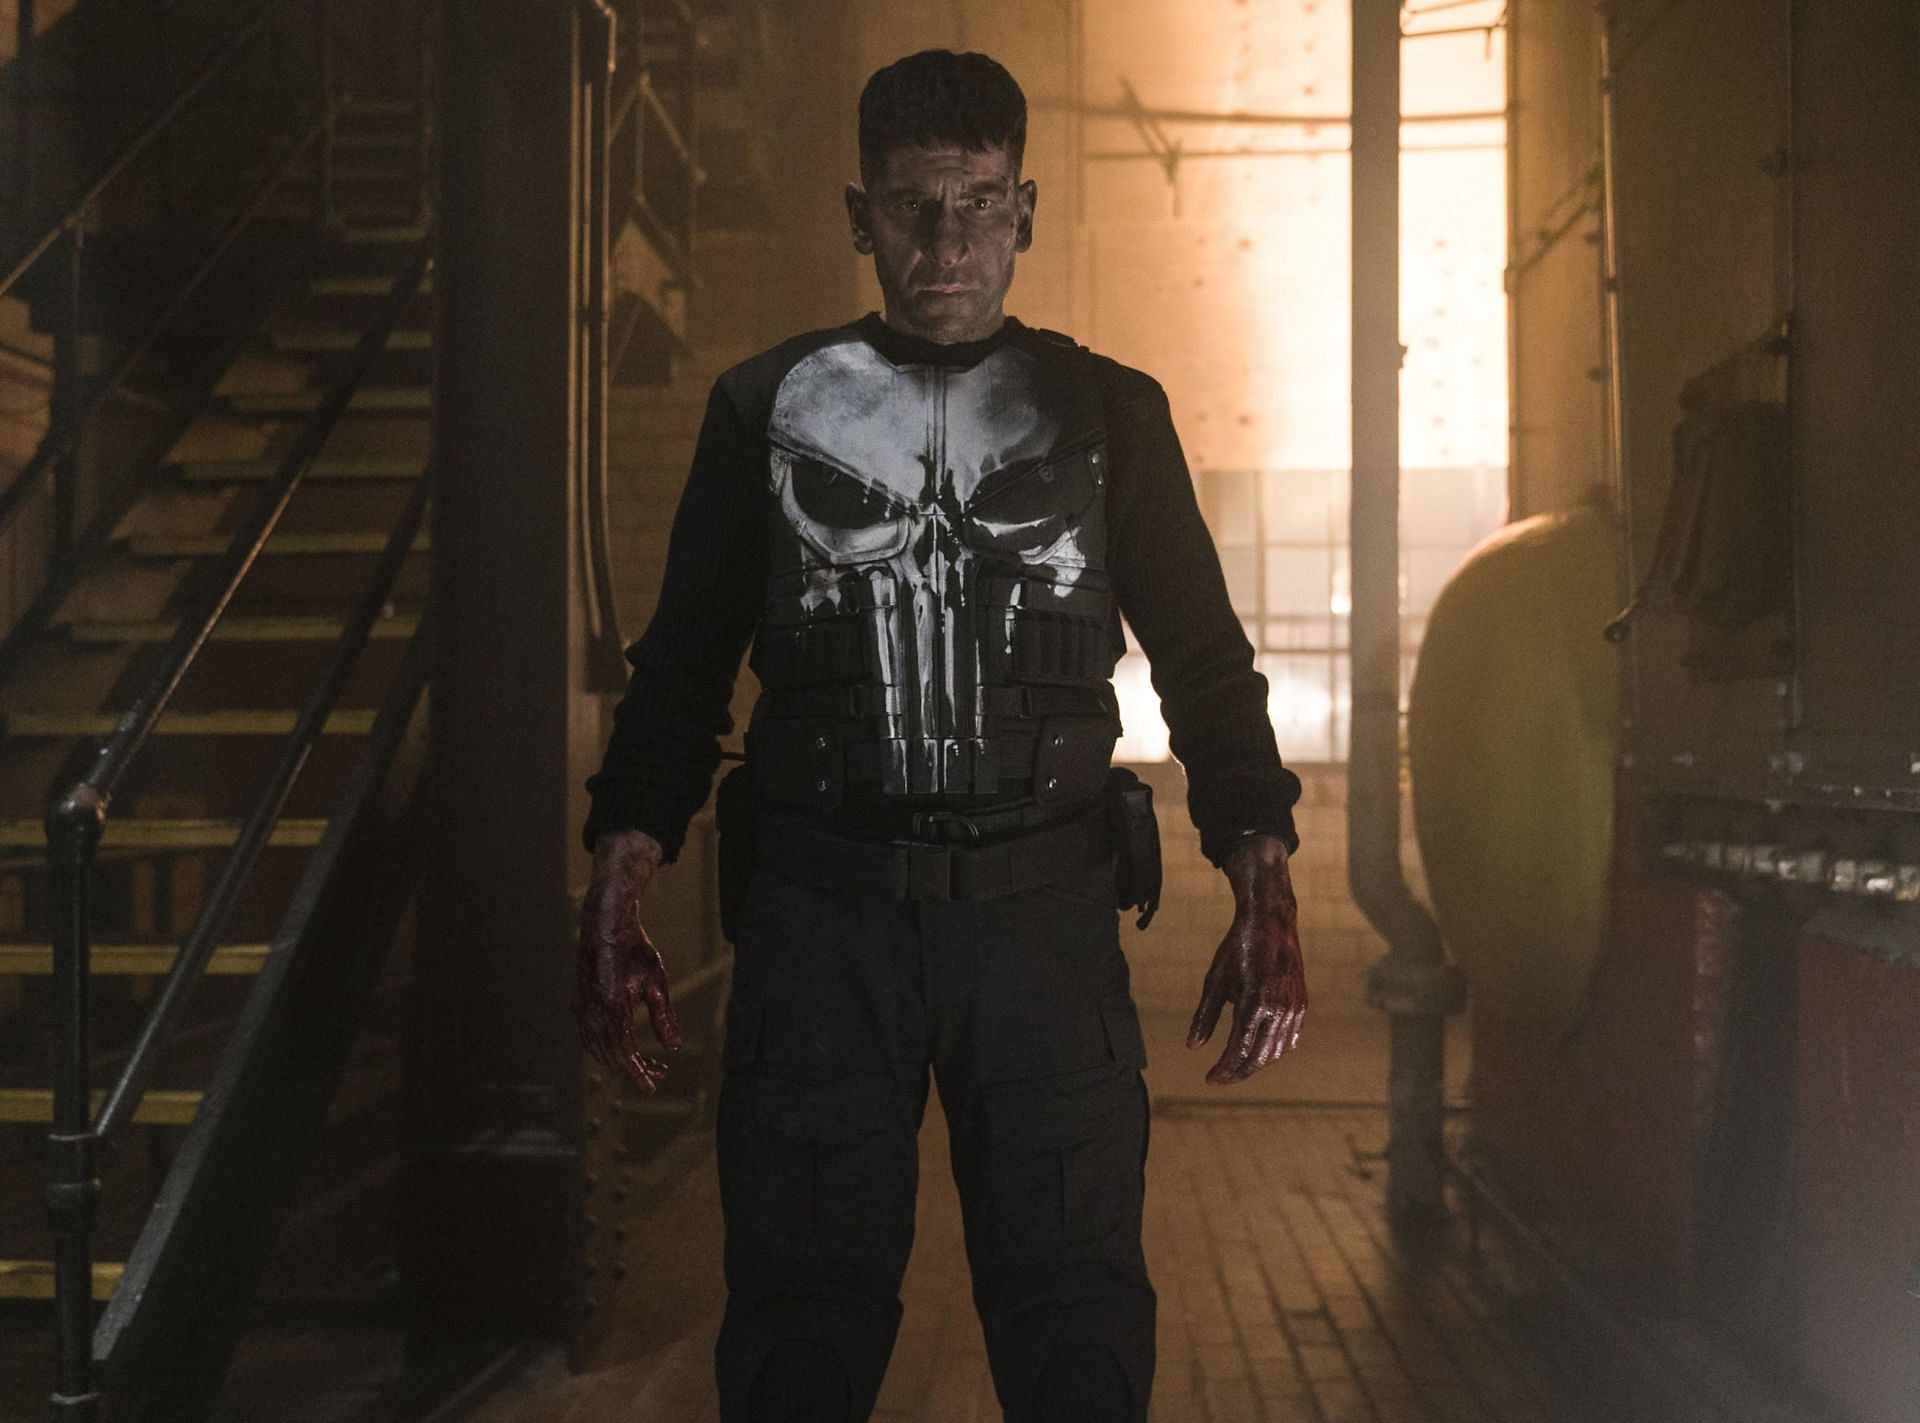 Jon Bernthal shows his dedication as the Punisher with firearms and physical training ahead of his highly anticipated return in the MCU (Image via Netflix)